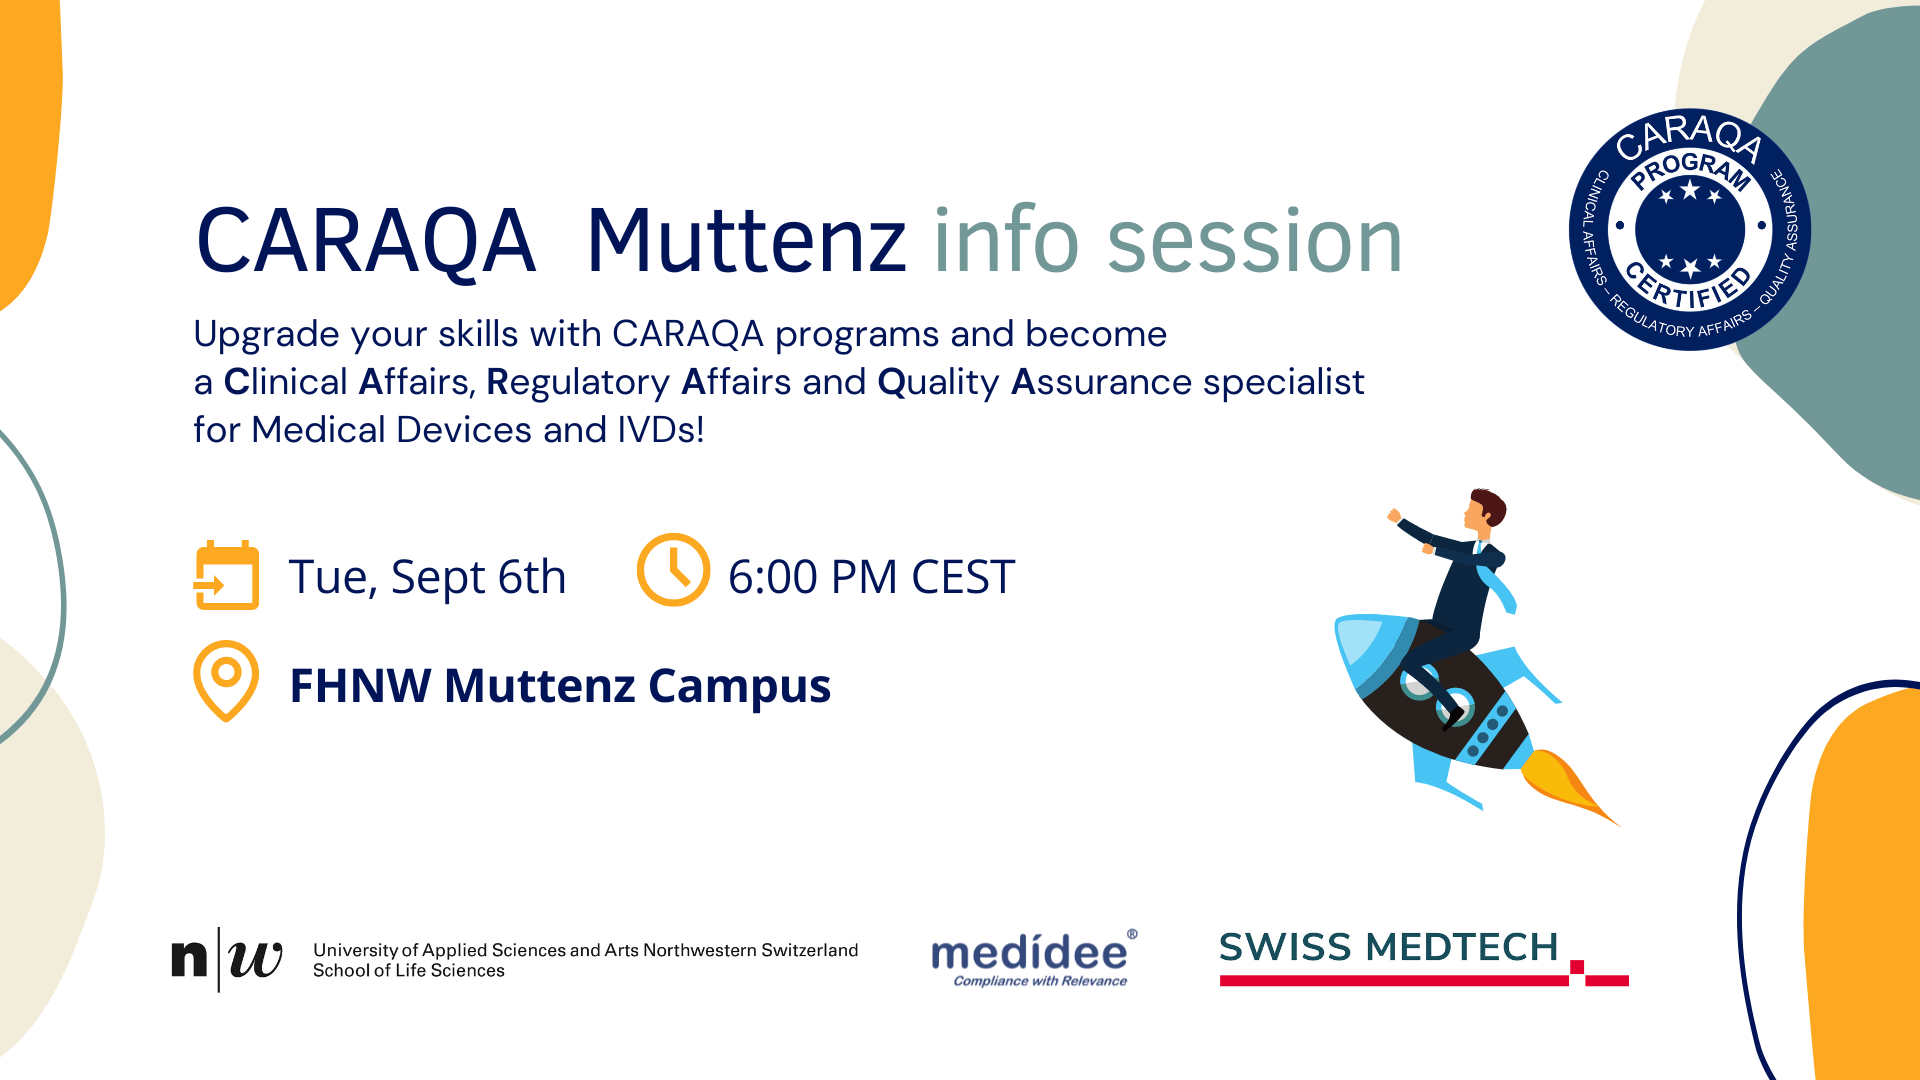 CARAQA Muttenz - Info Session on Sept. 6th